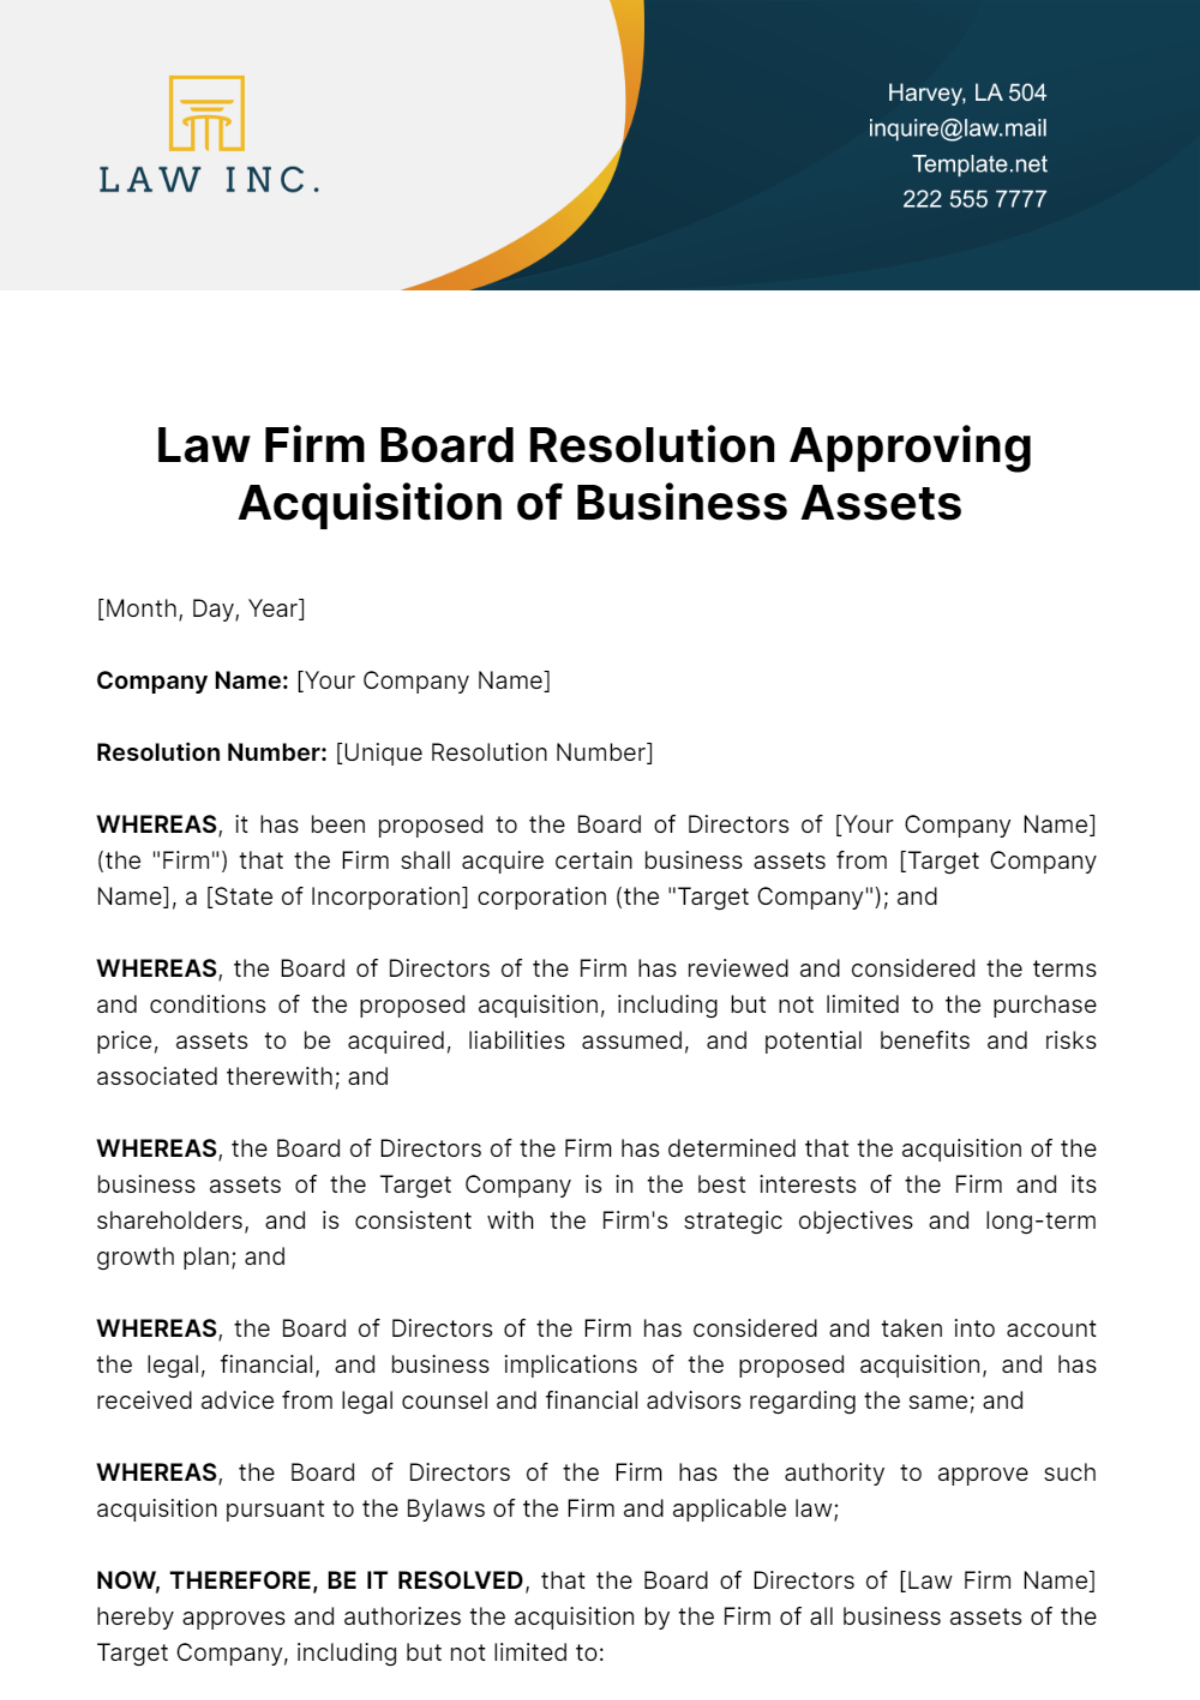 Law Firm Board Resolution Approving Acquisition of Business Assets Template